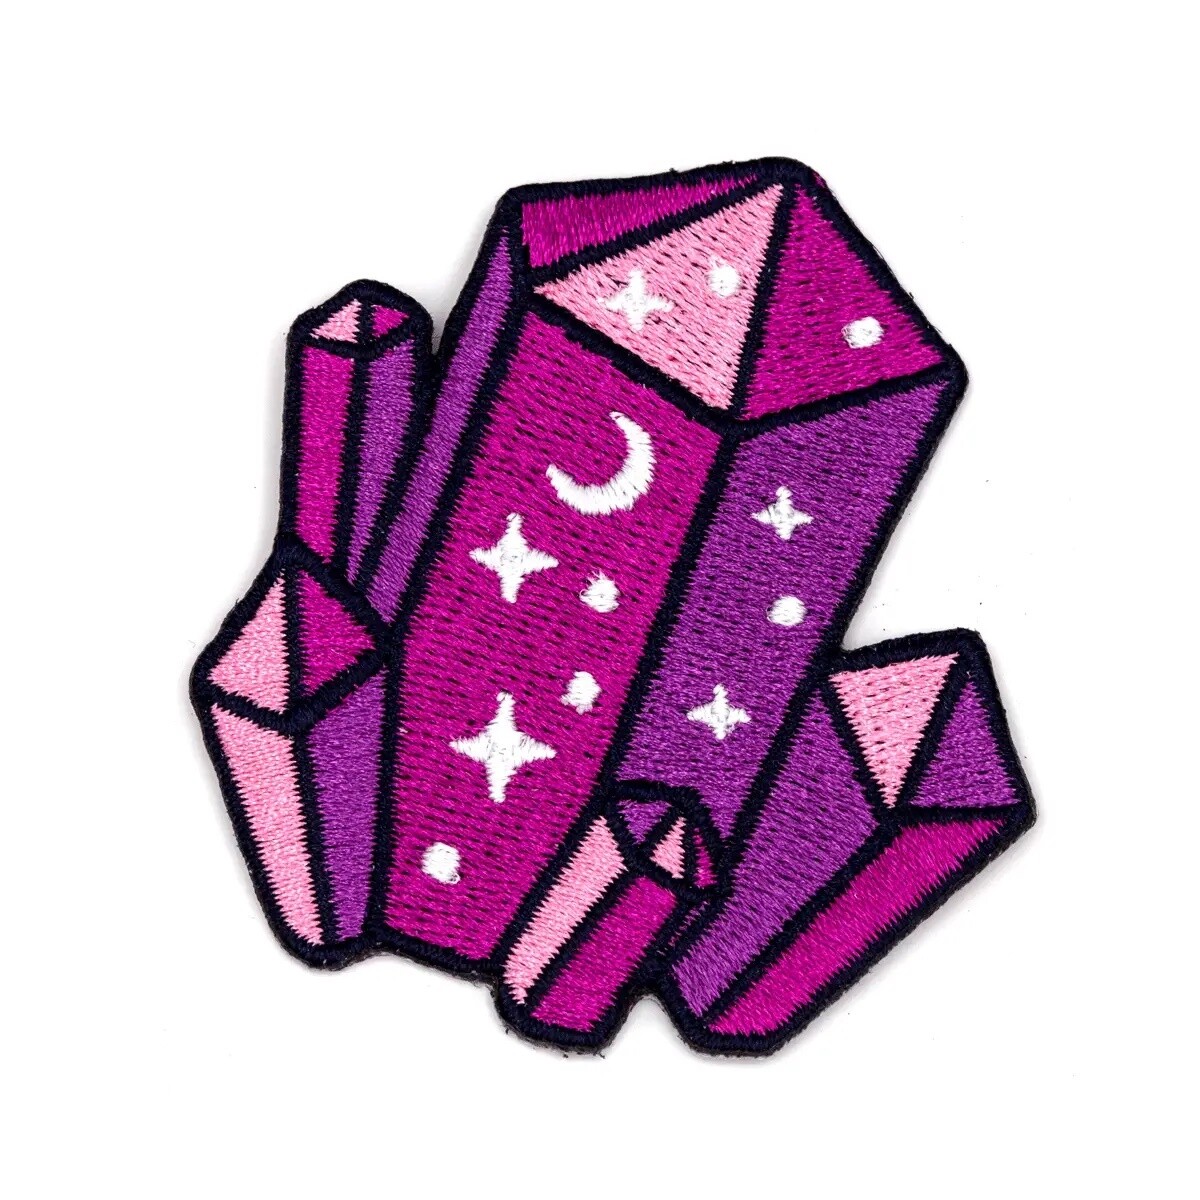 Night Sky Crystal - Embroidered Patch by These Are Things